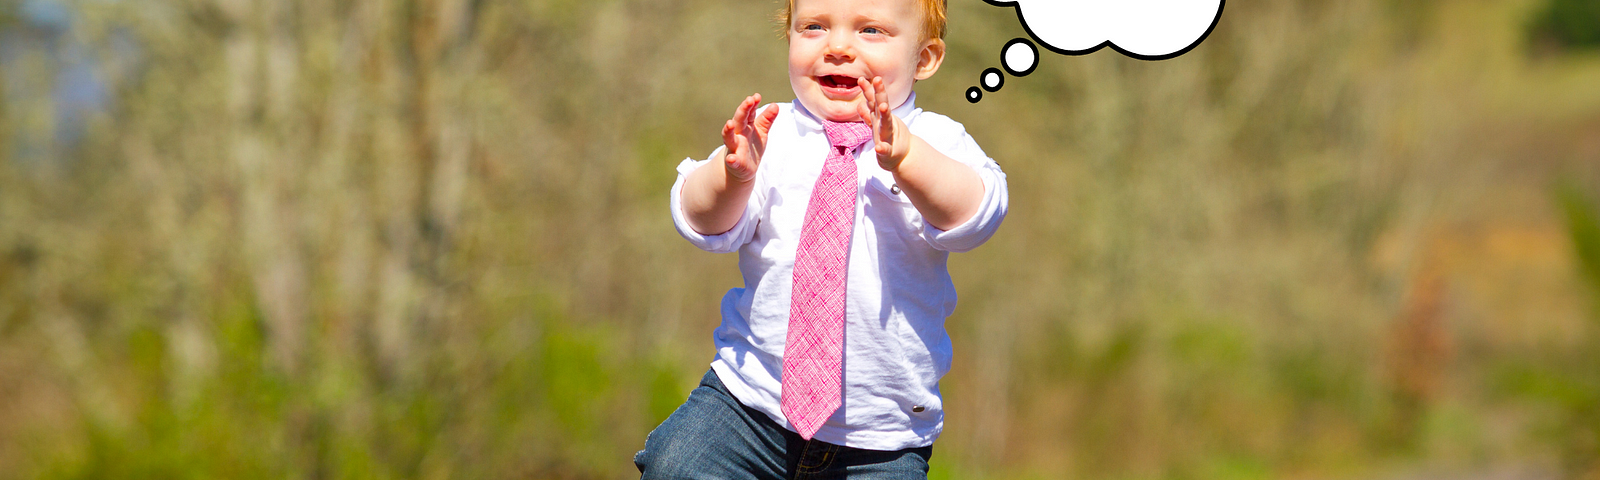 Image of a toddler walking on pavement wearing a pinkish-red necktie, dress shirt, and pants. A thought bubble above the baby’s head contains text reading, “This is a clip-on… my dad has failed me.”